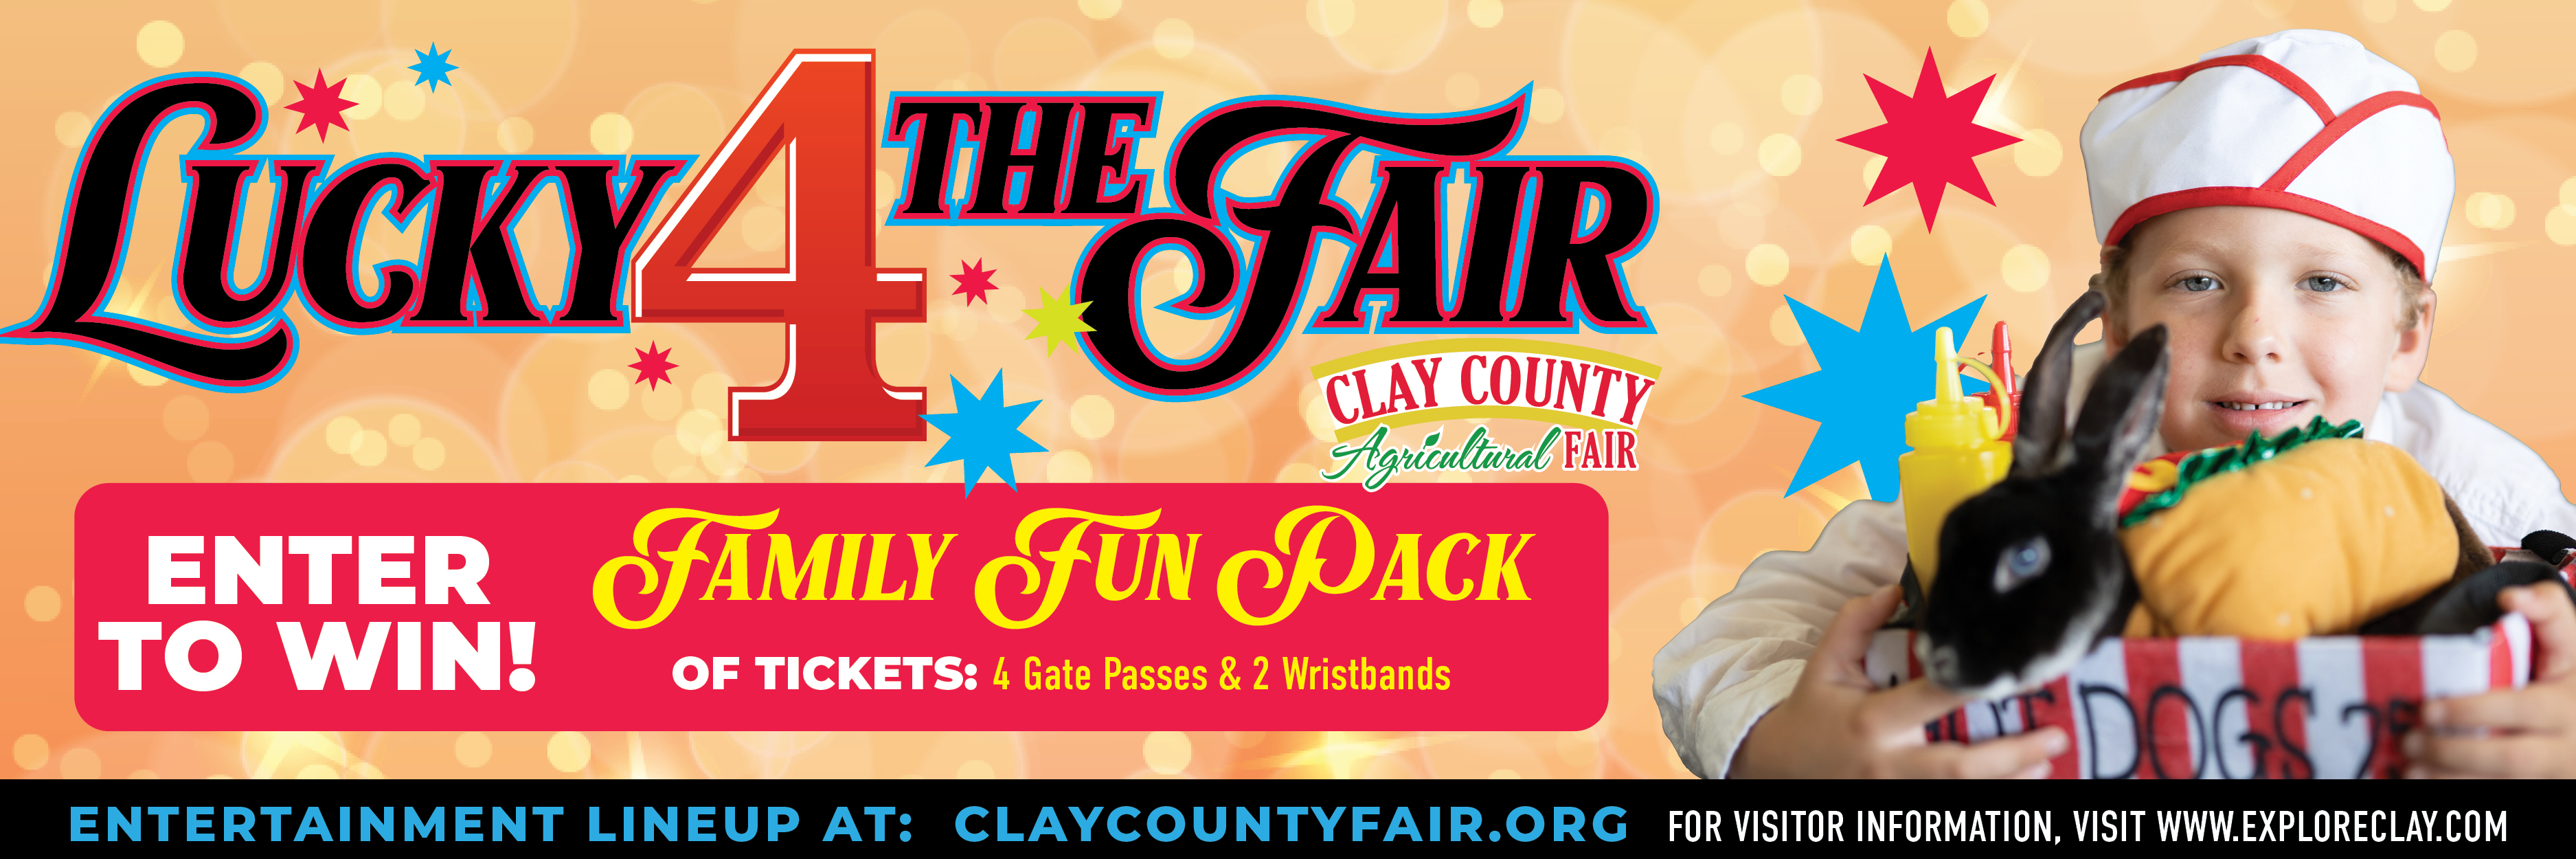 The Clay County Fair Giveaway!